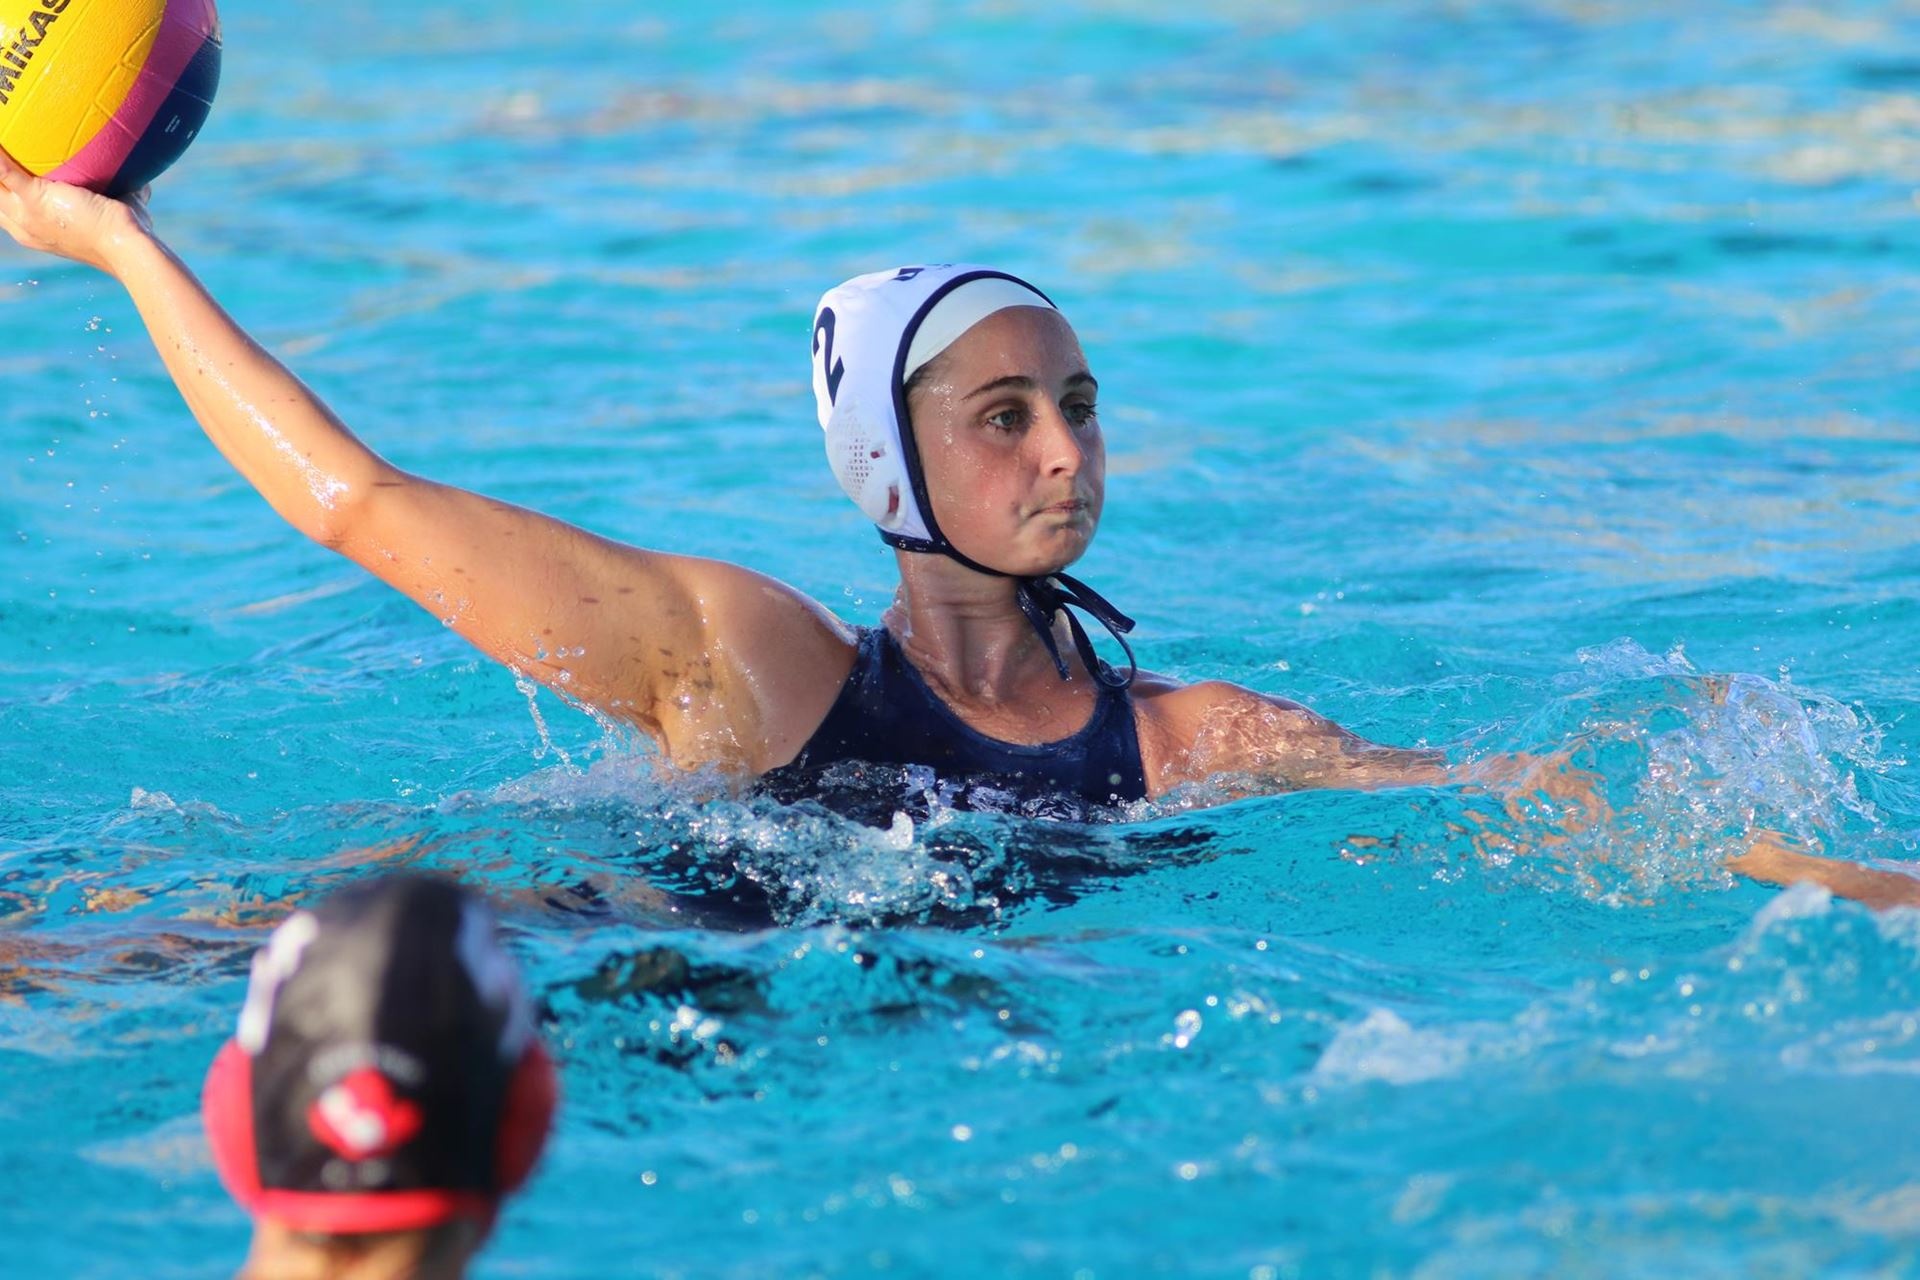 Water Polo: Madeline Musselman, Women's Most Valuable Player at the 2020 Tokyo Summer Olympics. 1920x1280 HD Wallpaper.